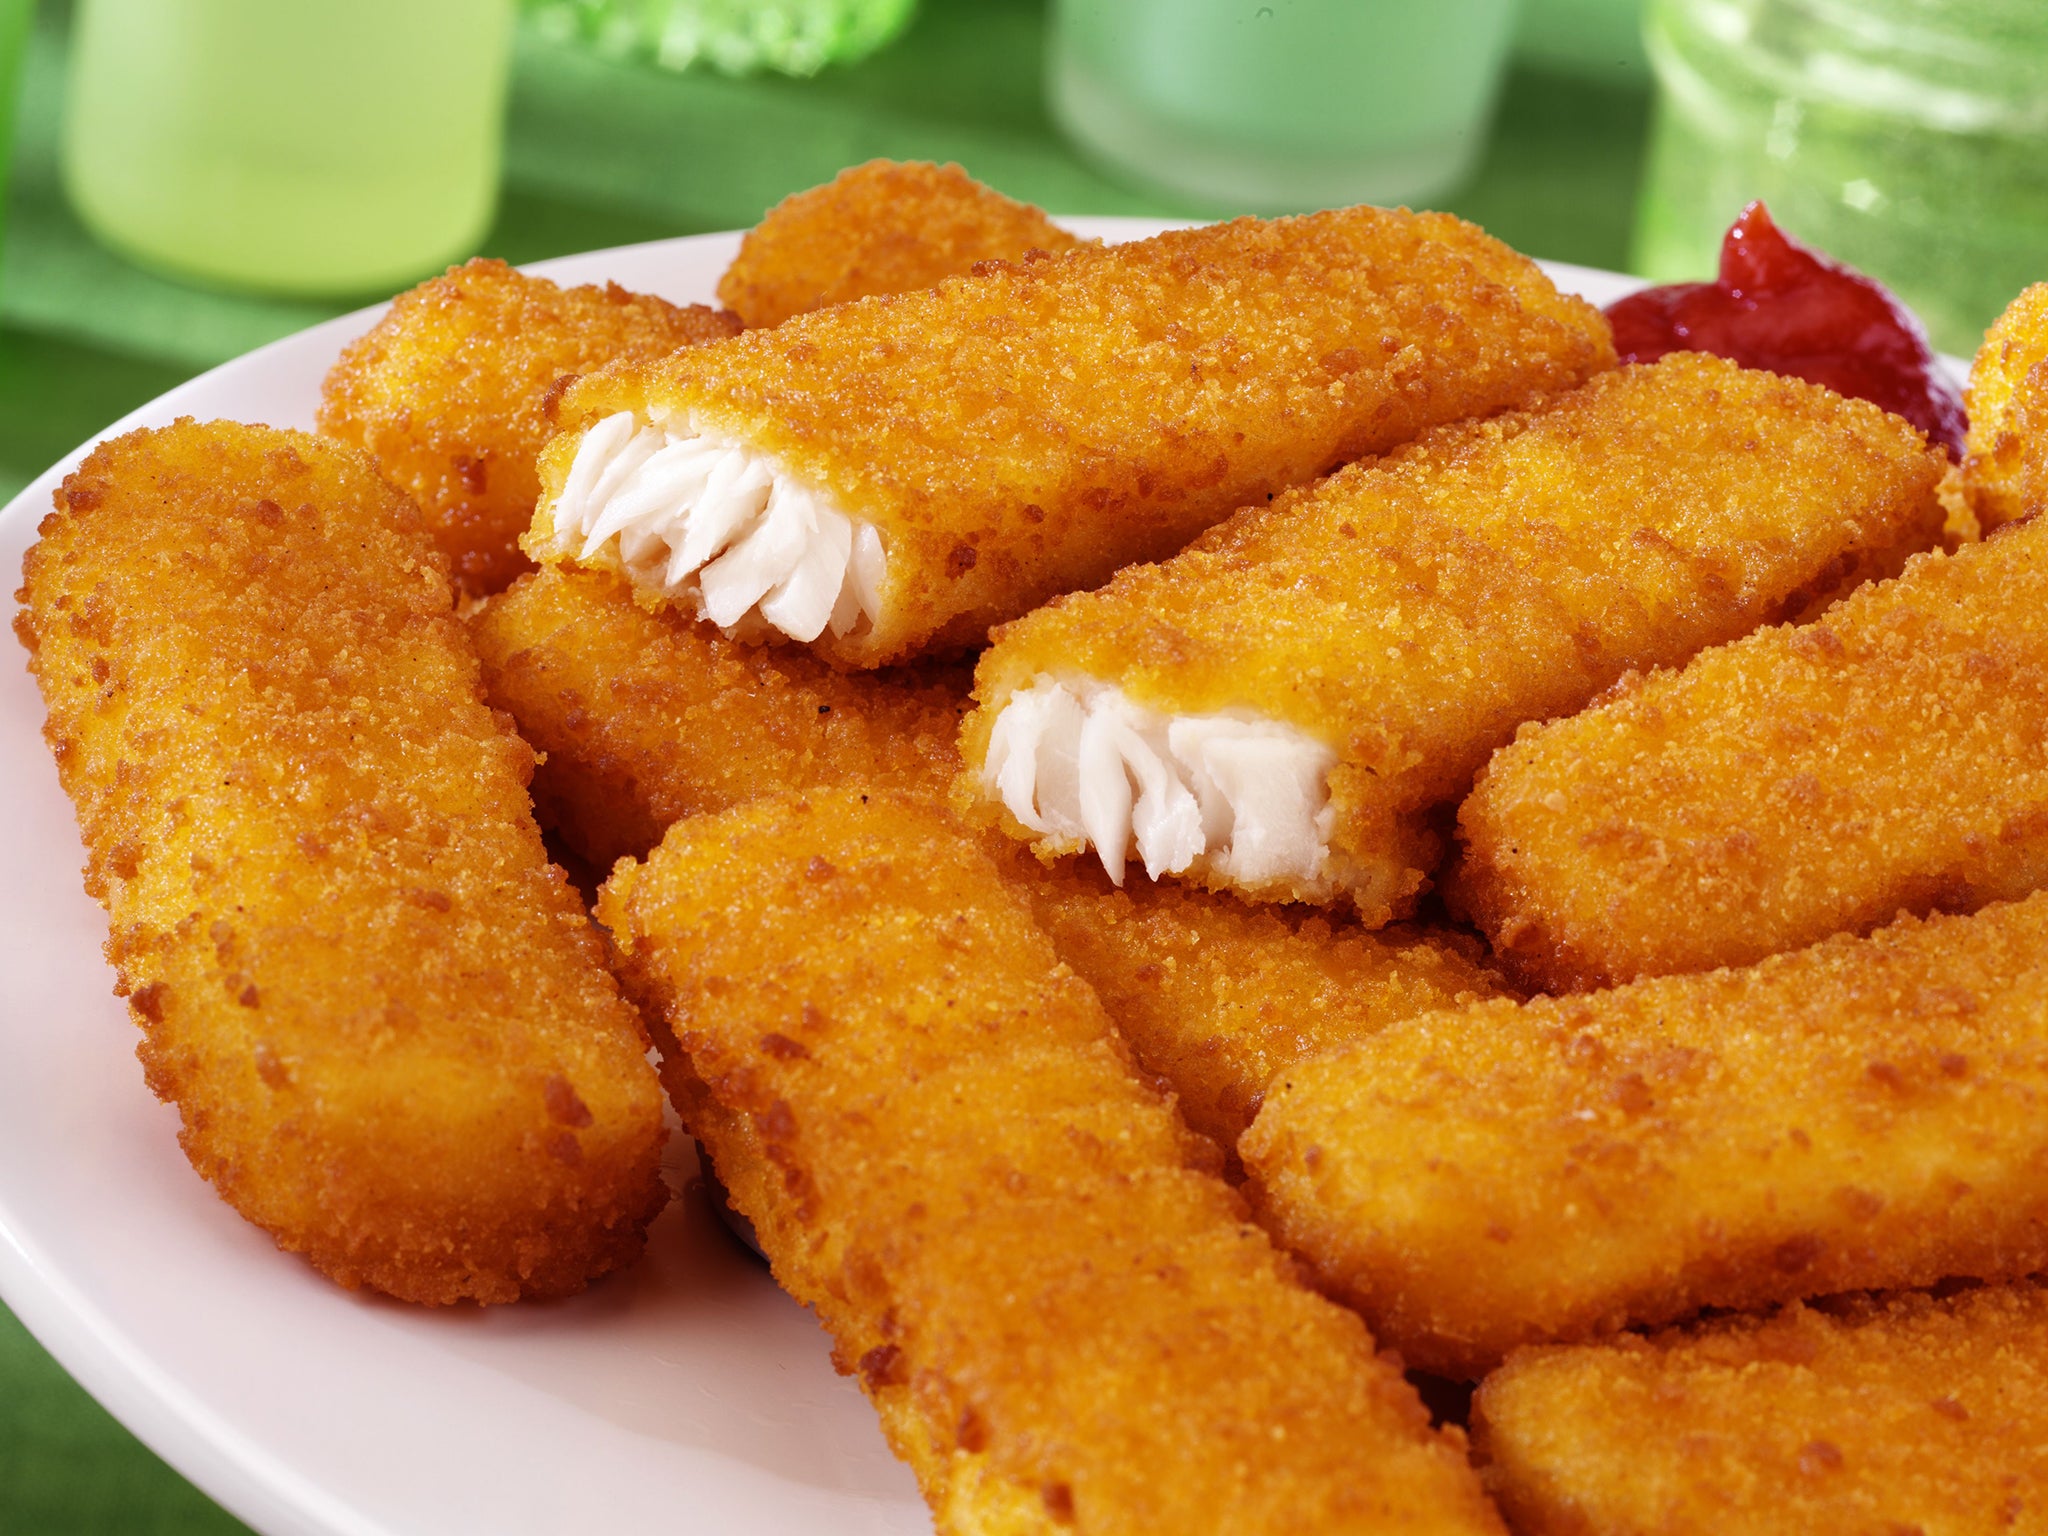 Fish fingers celebrating their 60th birthday: How a simple staple